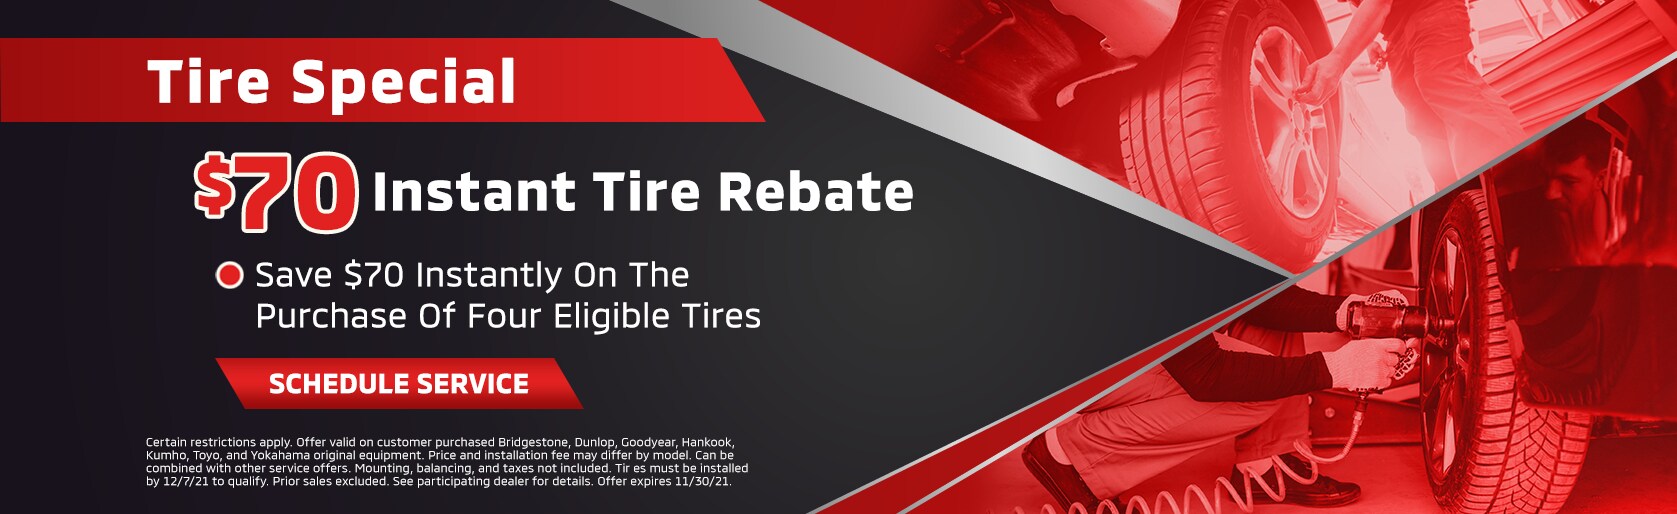 Tire Coupon Special